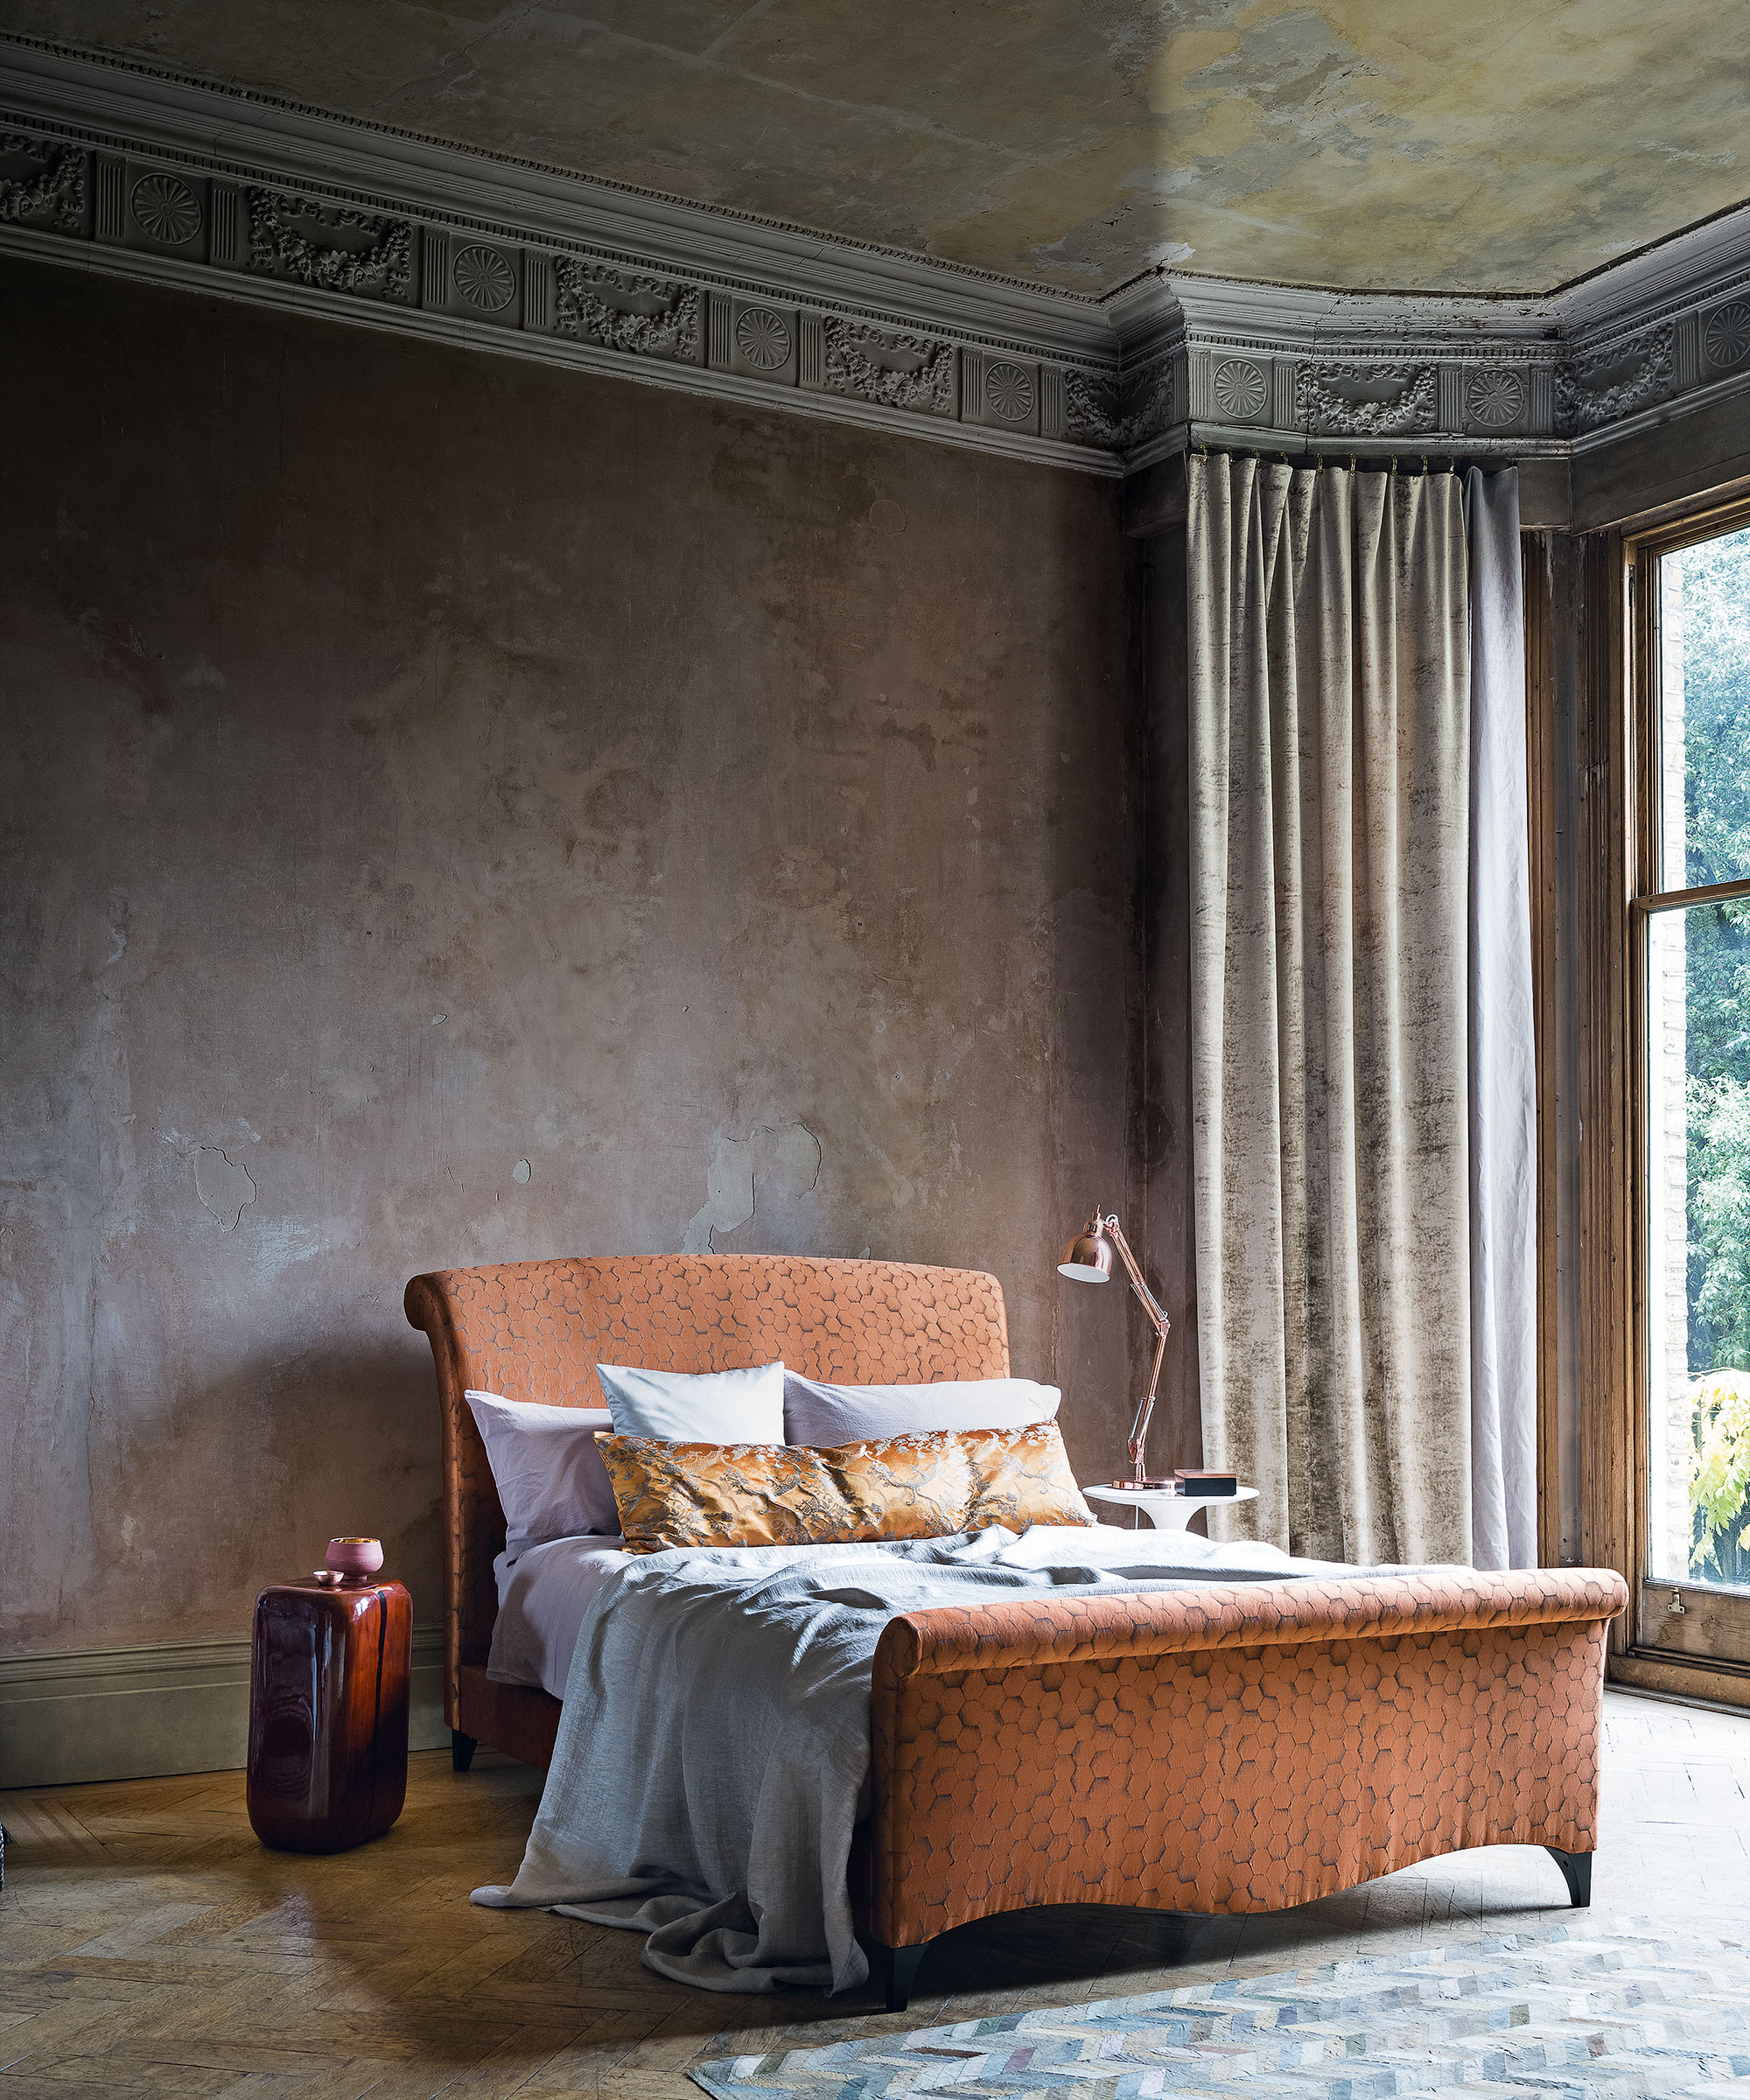 Luxury bedroom ideas with wallpapered ceiling and orange bed in front of a plaster wall.